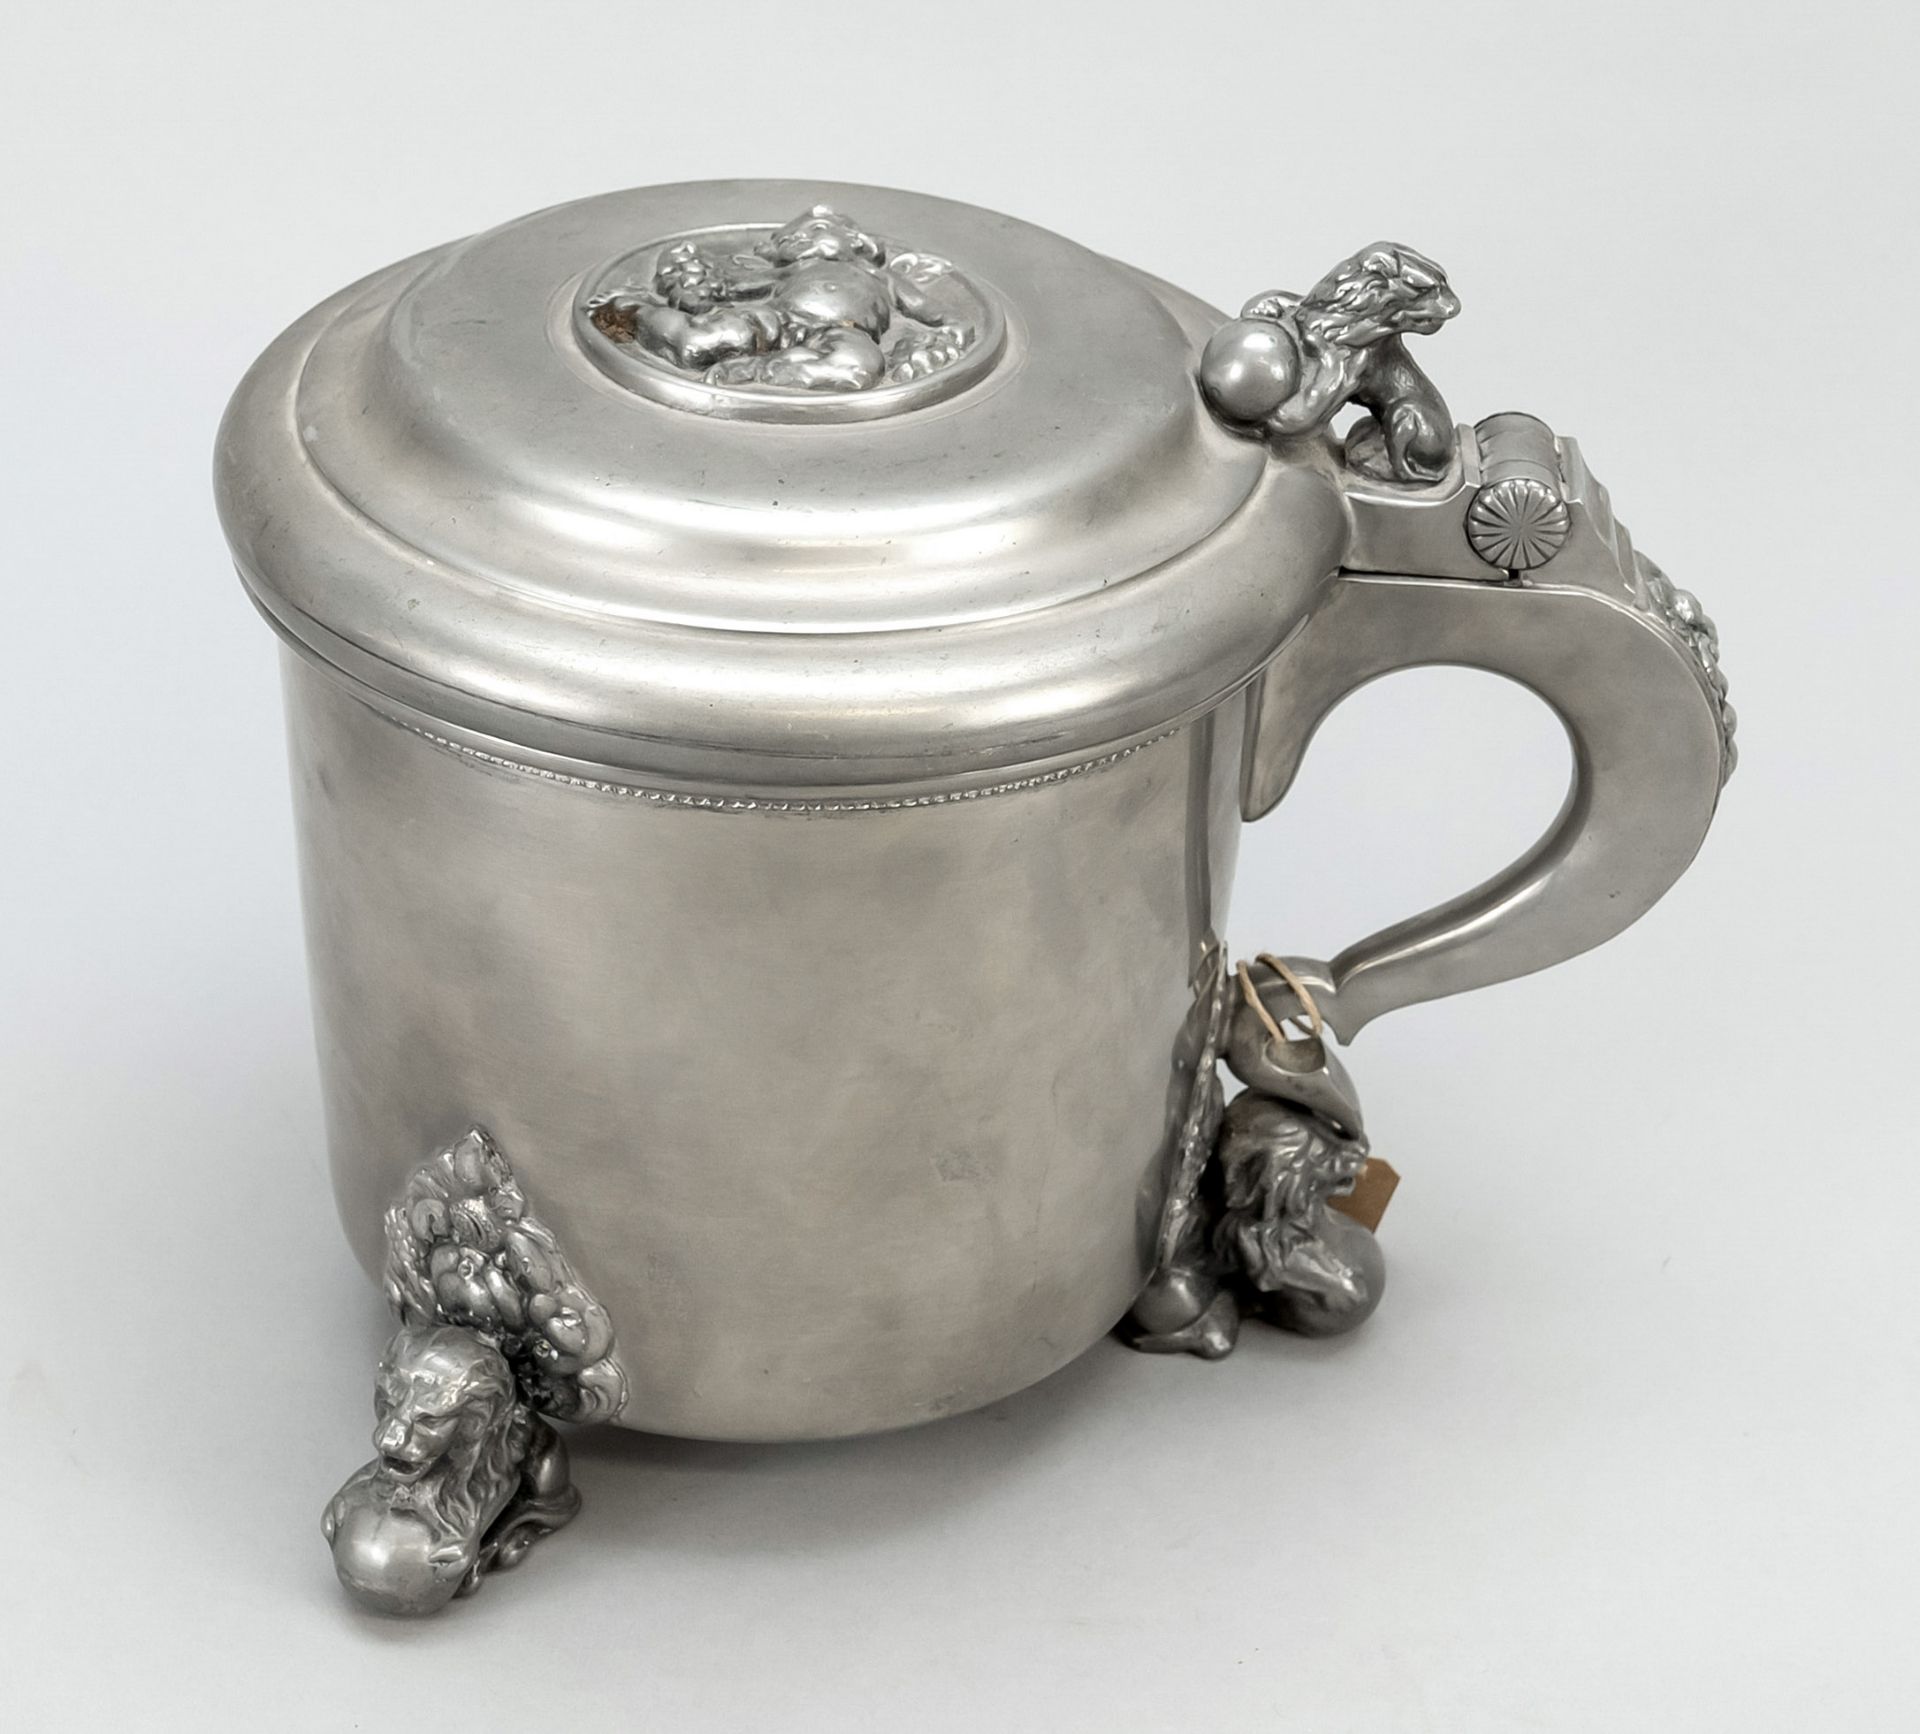 Renaissance style tankard with lid mount, late 19th/early 20th century, pewter. Cylindrical body